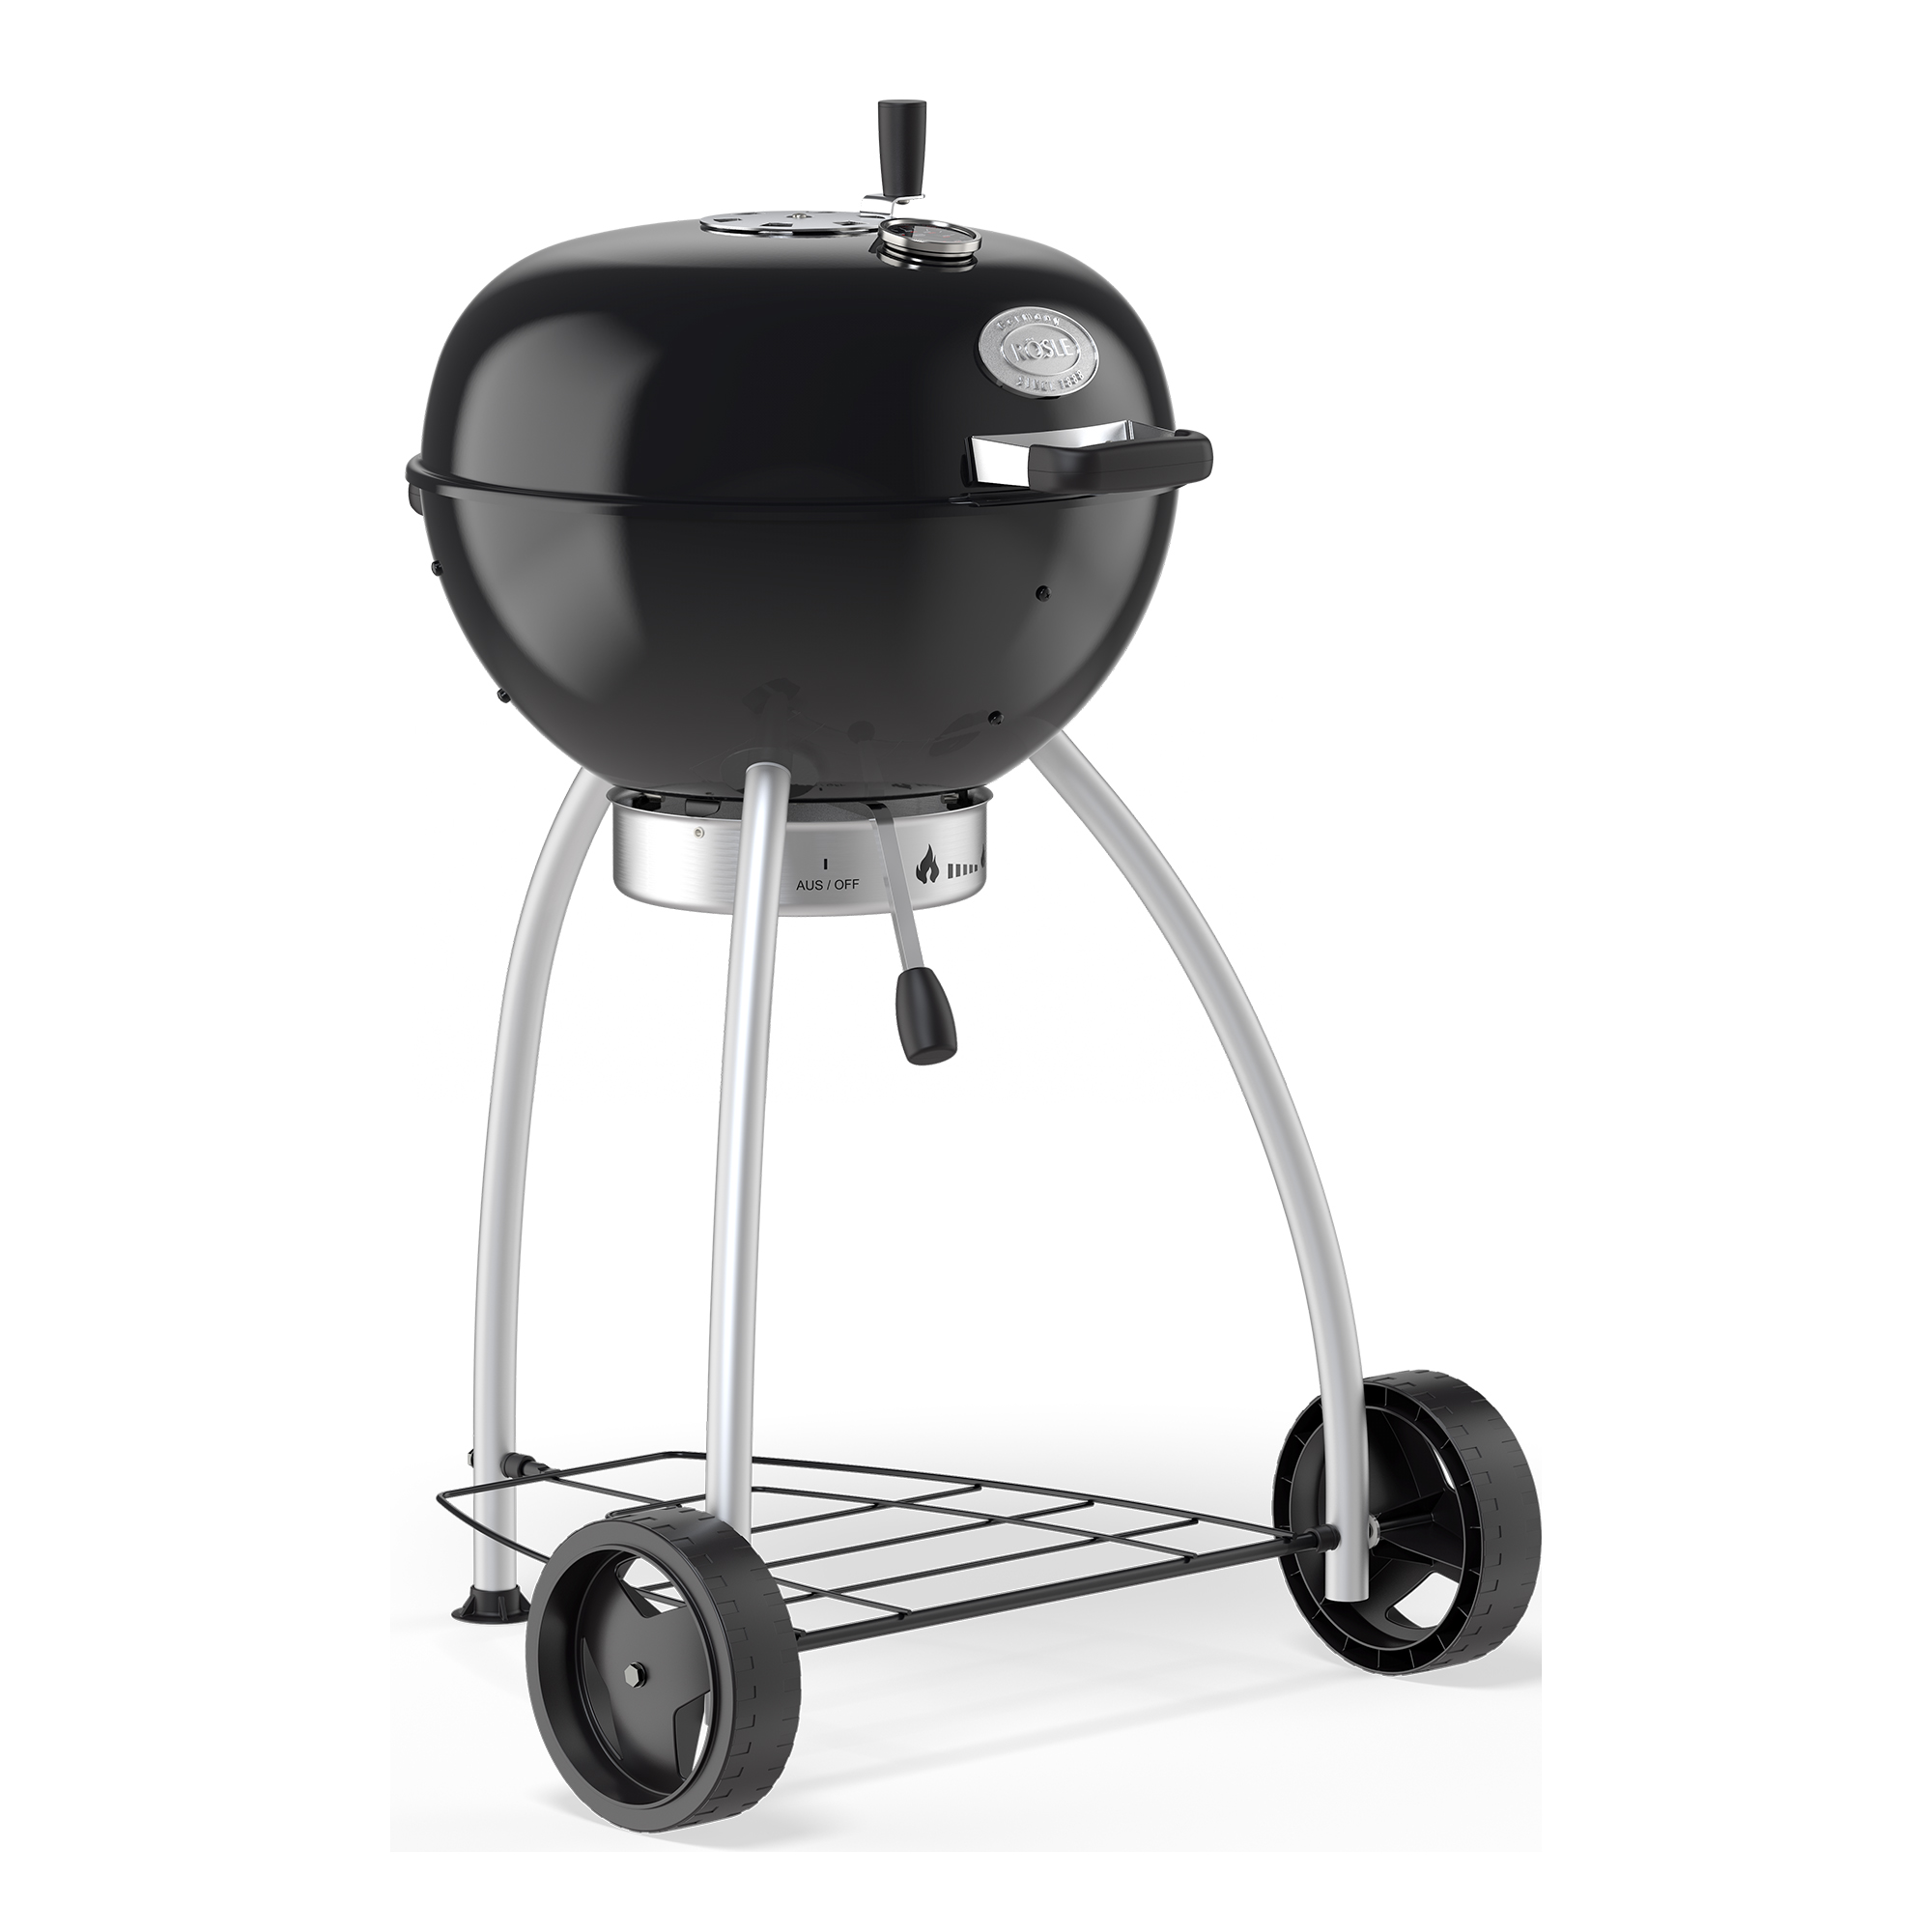 Kettle Grill No.1 Belly F50 black (Ø 50 cm|20 in.)